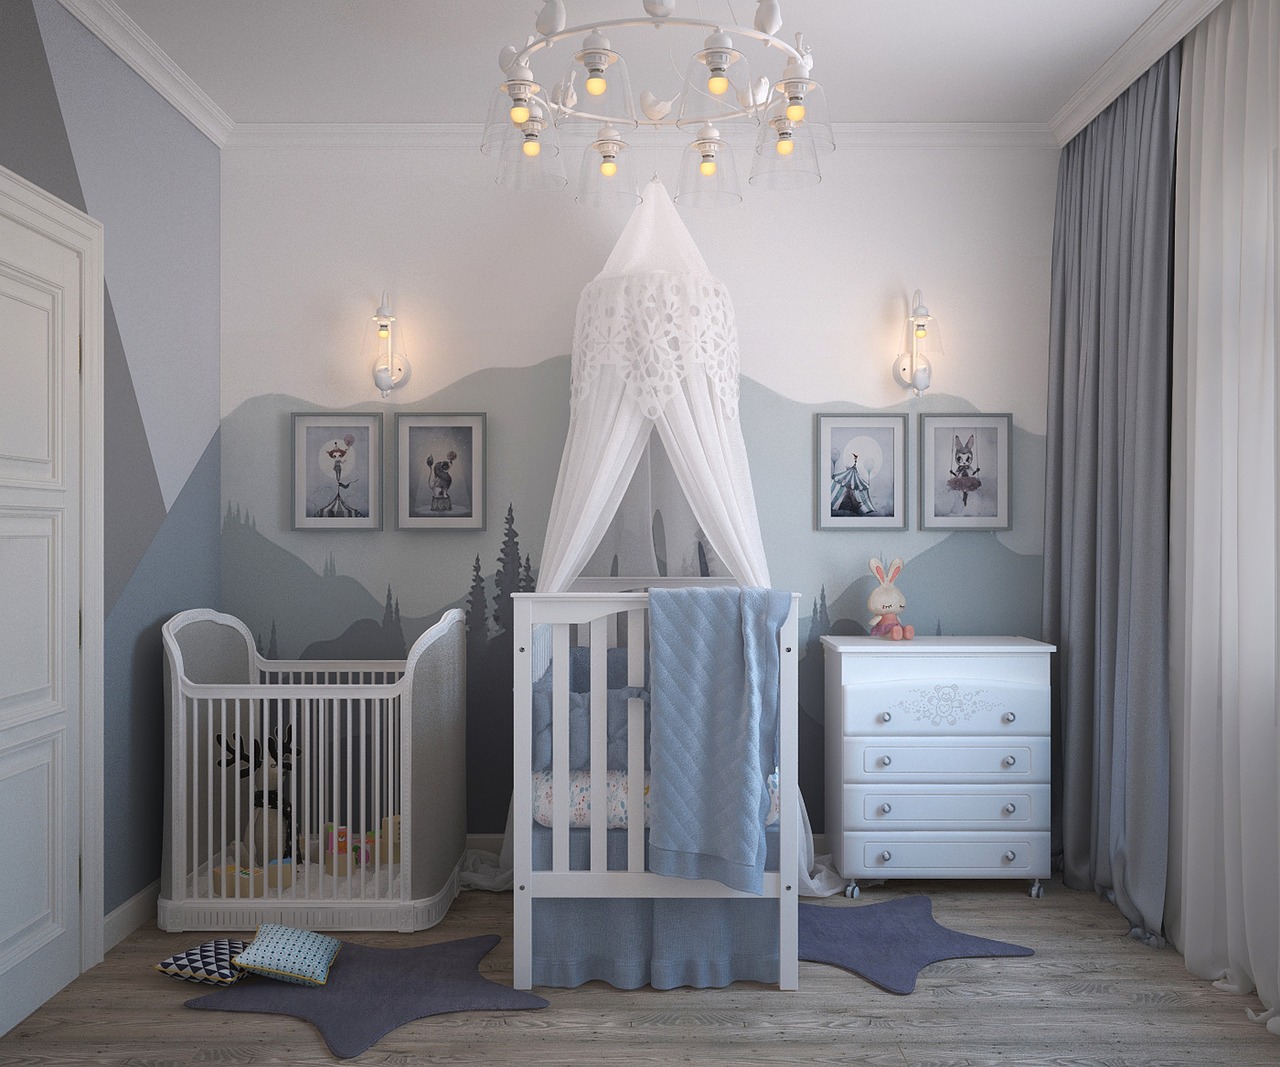 Keep the temperature in the baby's room comfortable